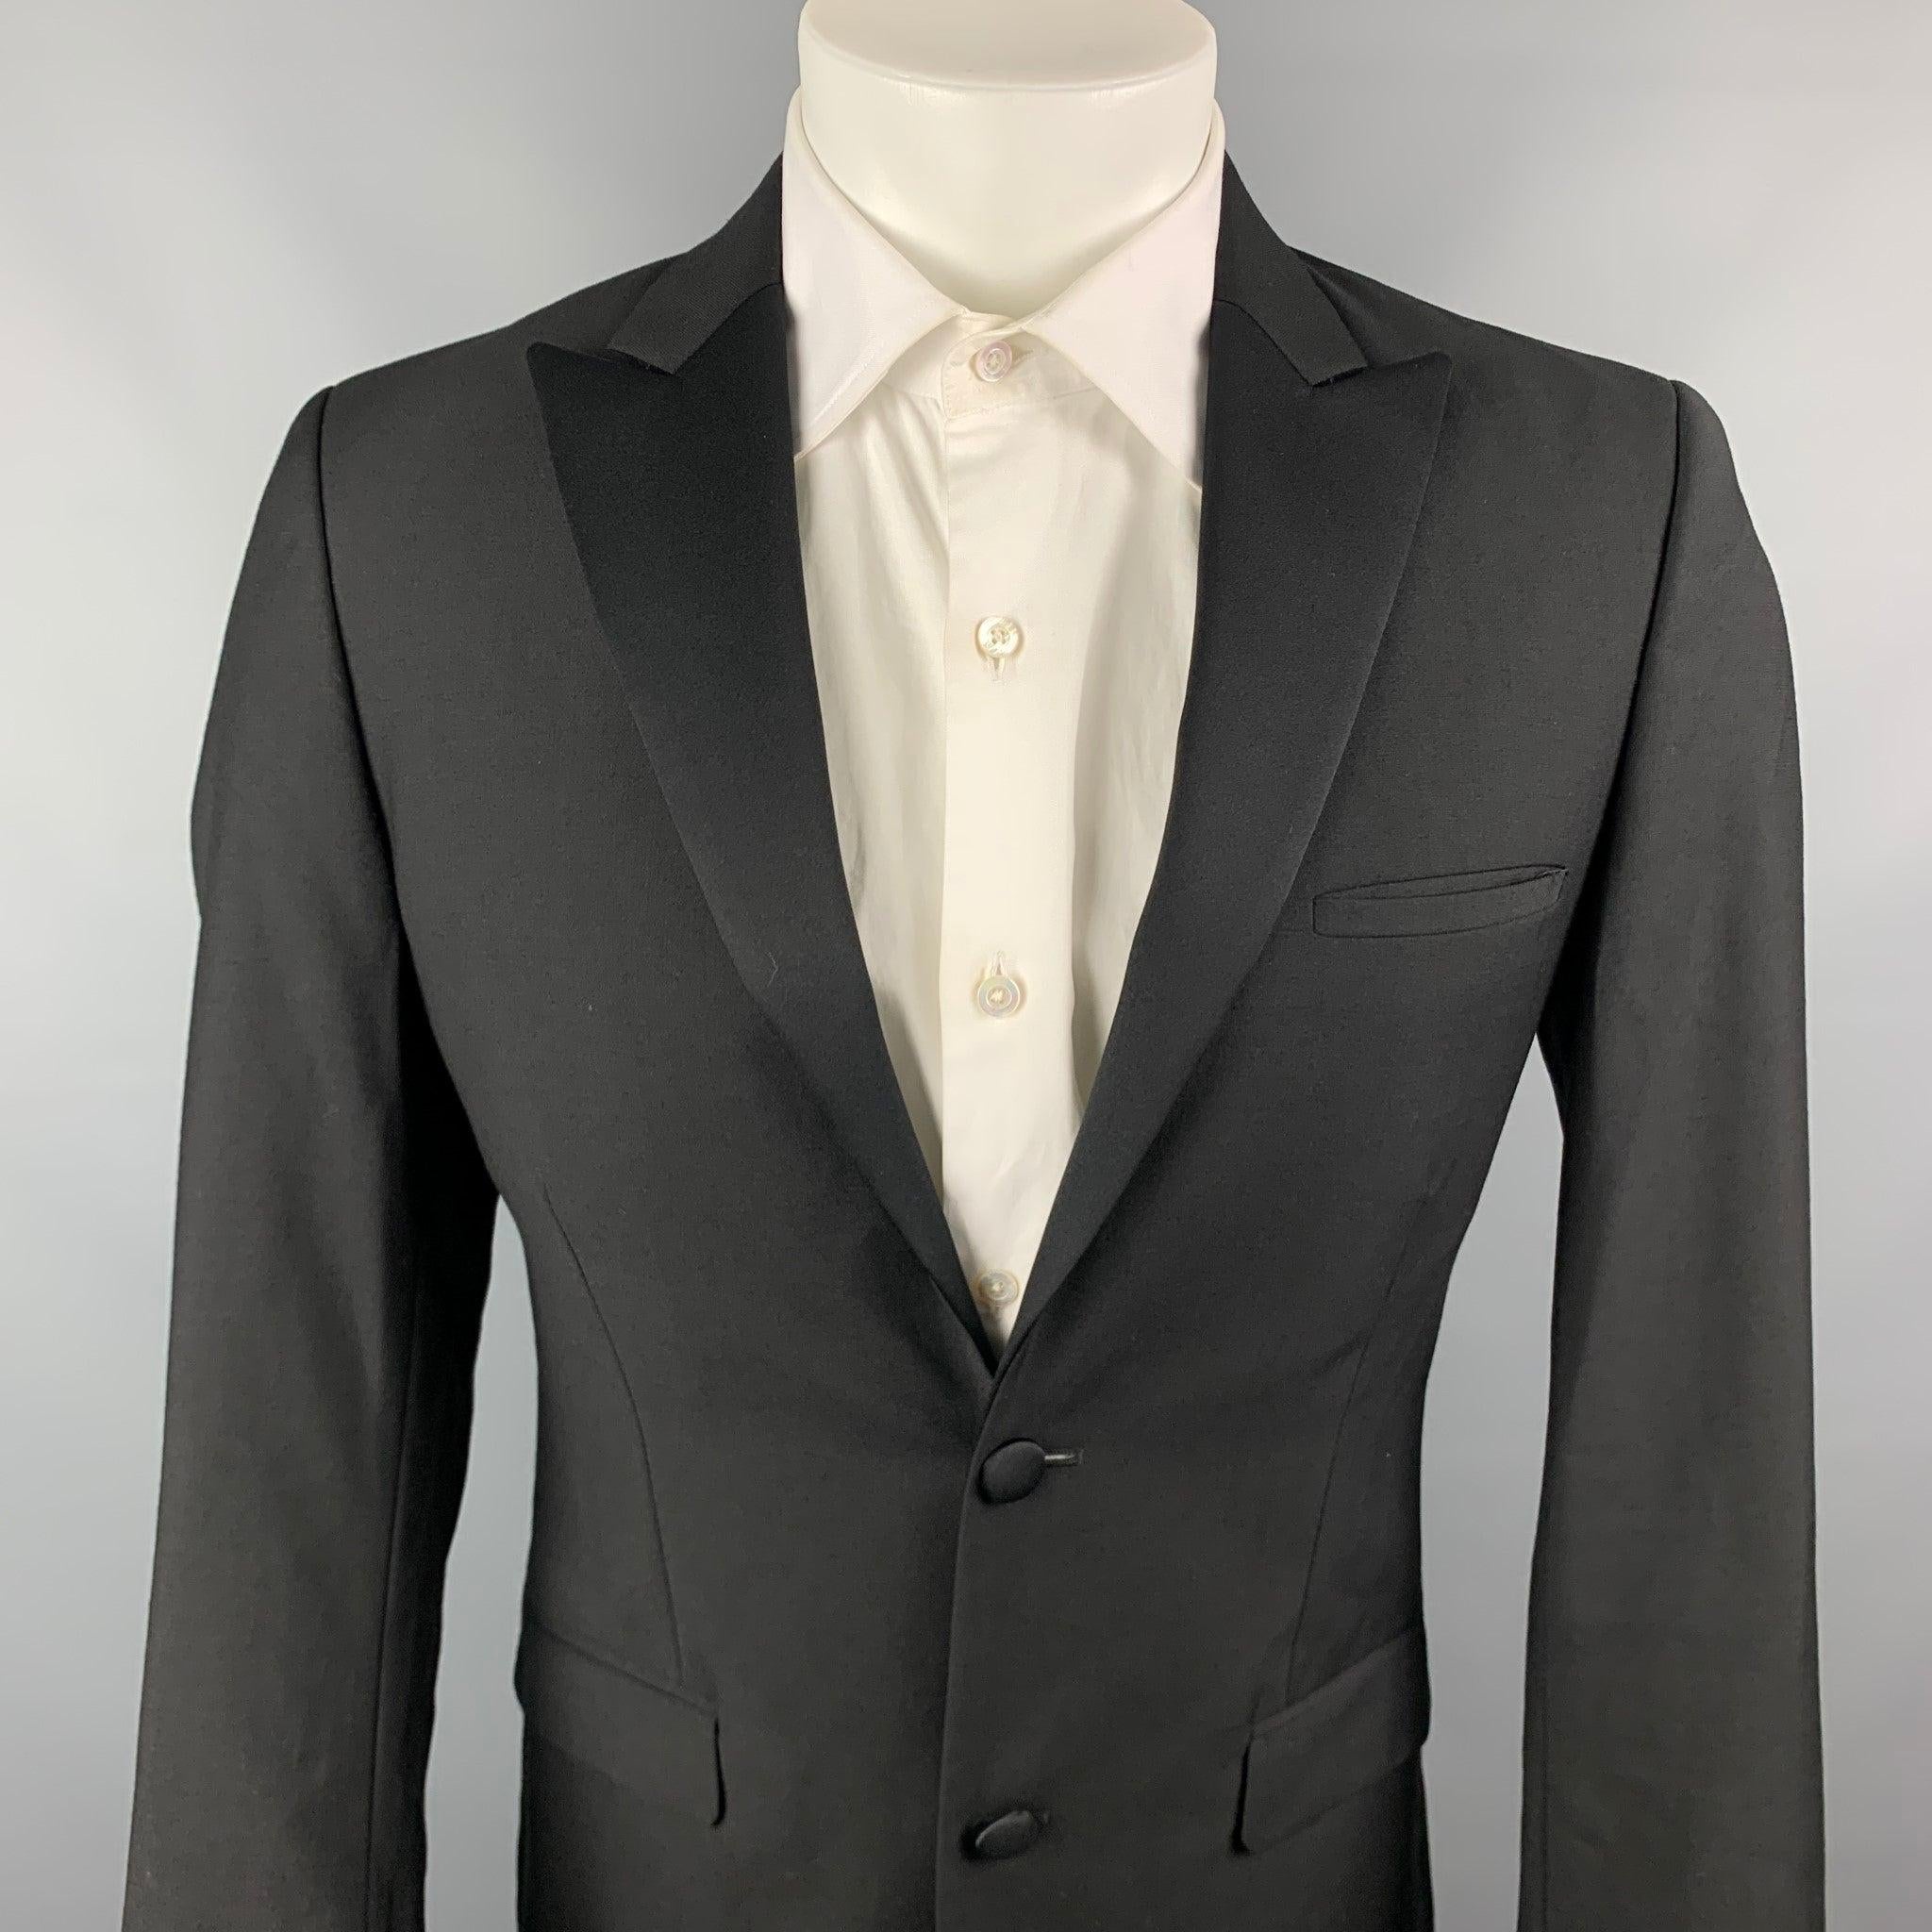 CALVIN KLEIN COLLECTION tuxedo sport coat comes in a black wool with a full liner featuring a
peak
lapel, flap pockets, and a double button closure.
Very
Good
Pre-Owned Condition. 

Marked:   46 

Measurements: 
 
Shoulder: 17
inches